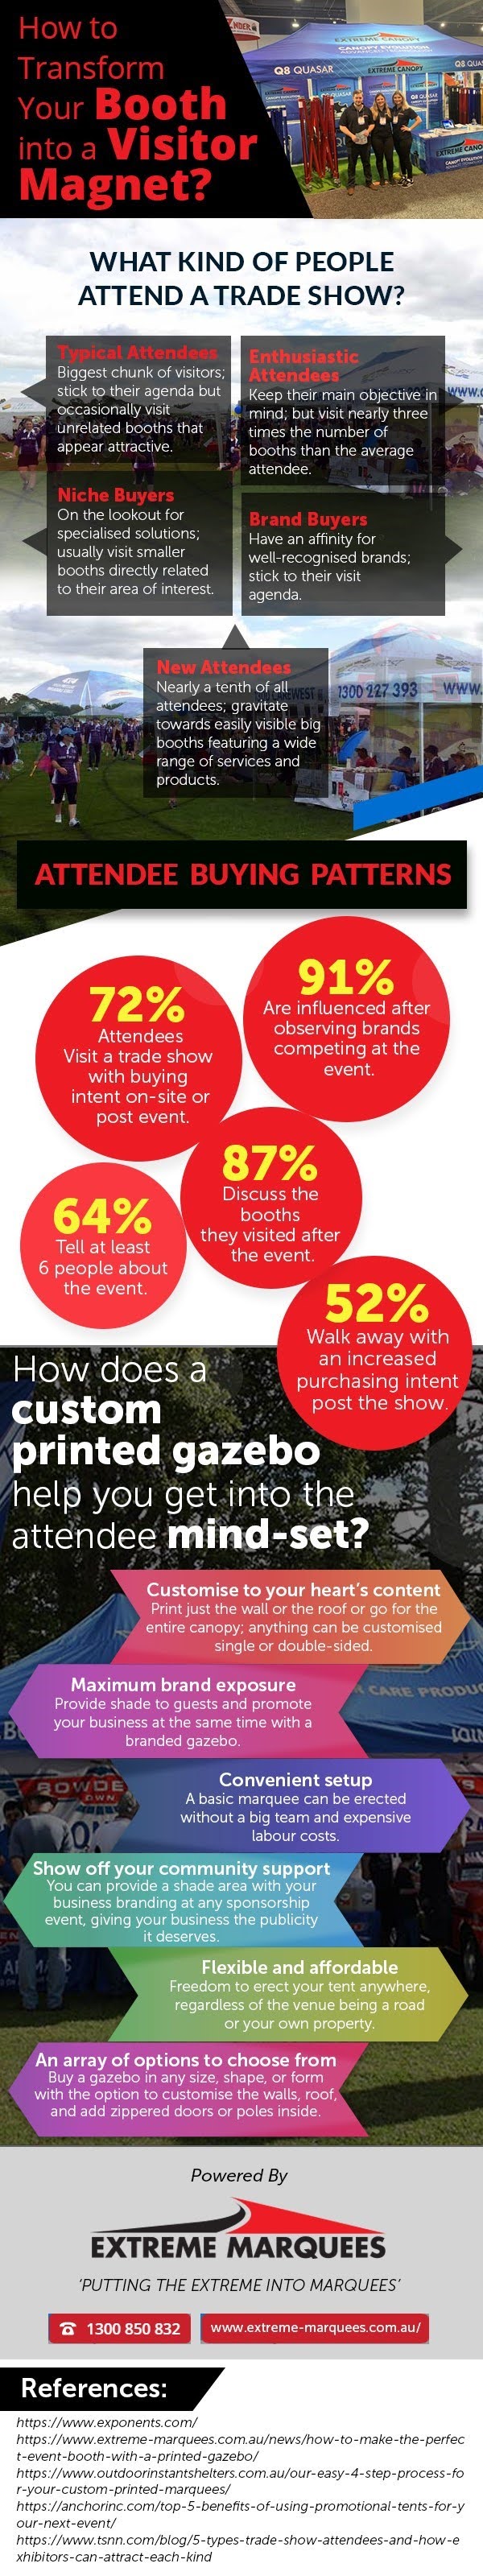 How to Transform Your Booth Into a Visitor Magnet? #infographic